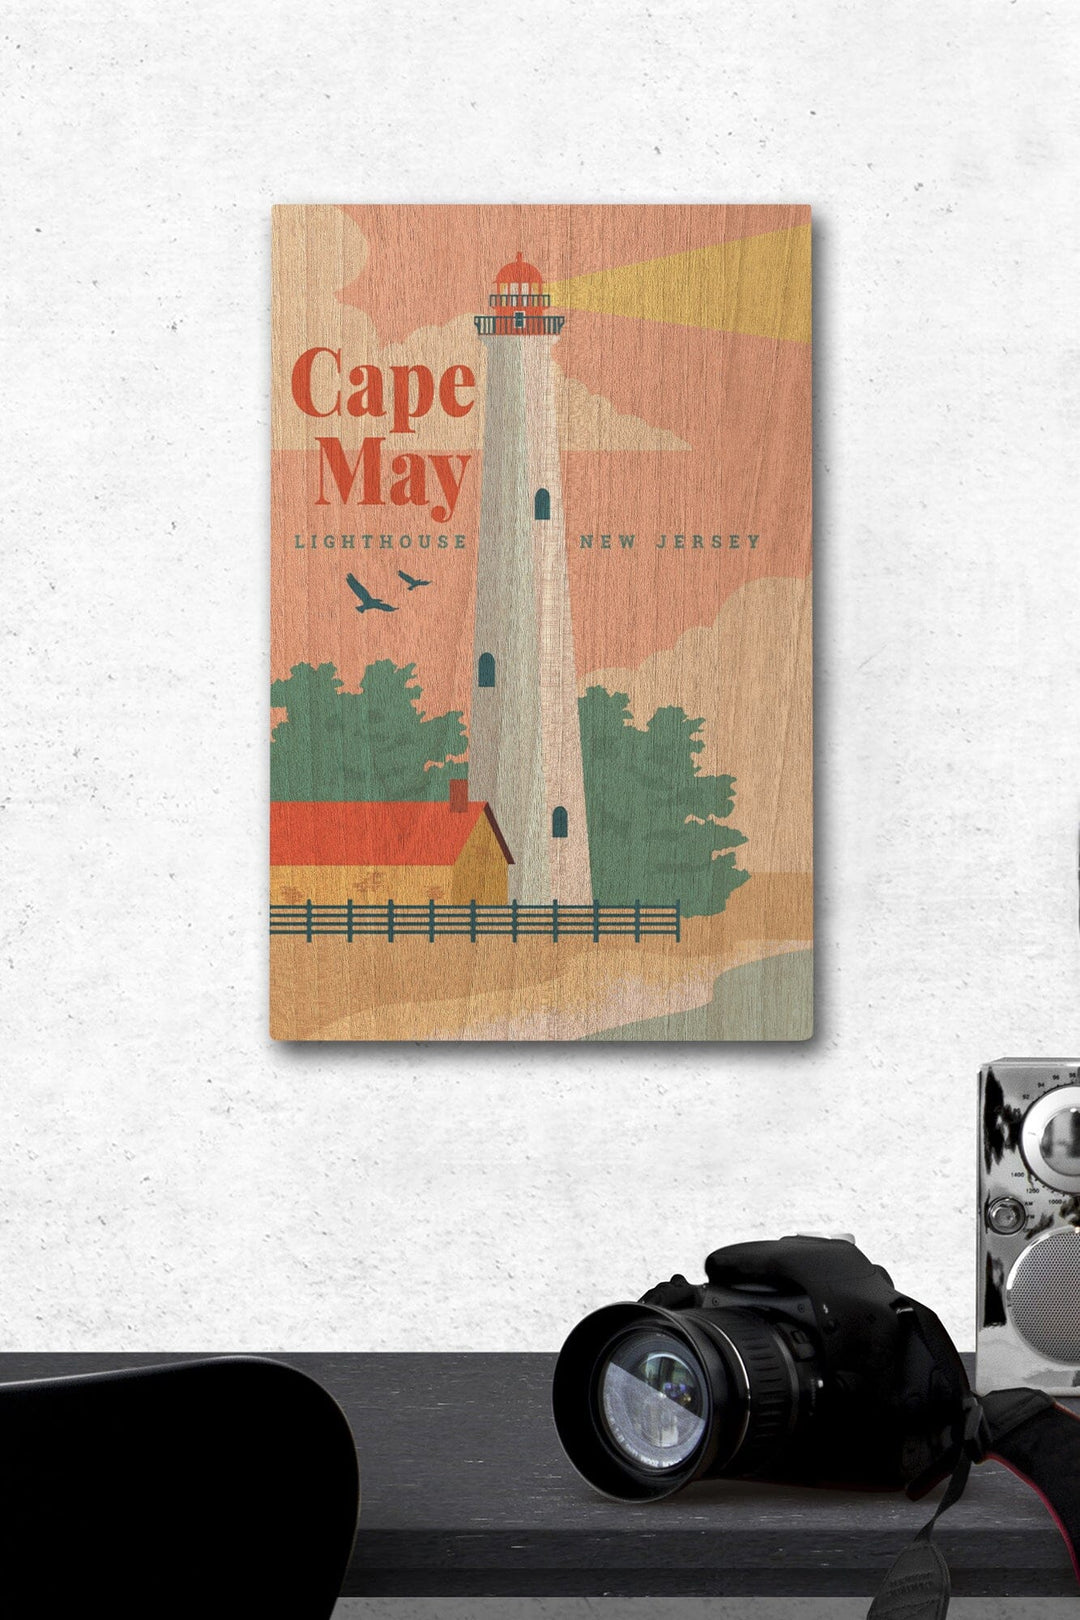 Cape May, New Jersey, Lighthouse Scene, Vector, Lantern Press Artwork, Wood Signs and Postcards Wood Lantern Press 12 x 18 Wood Gallery Print 